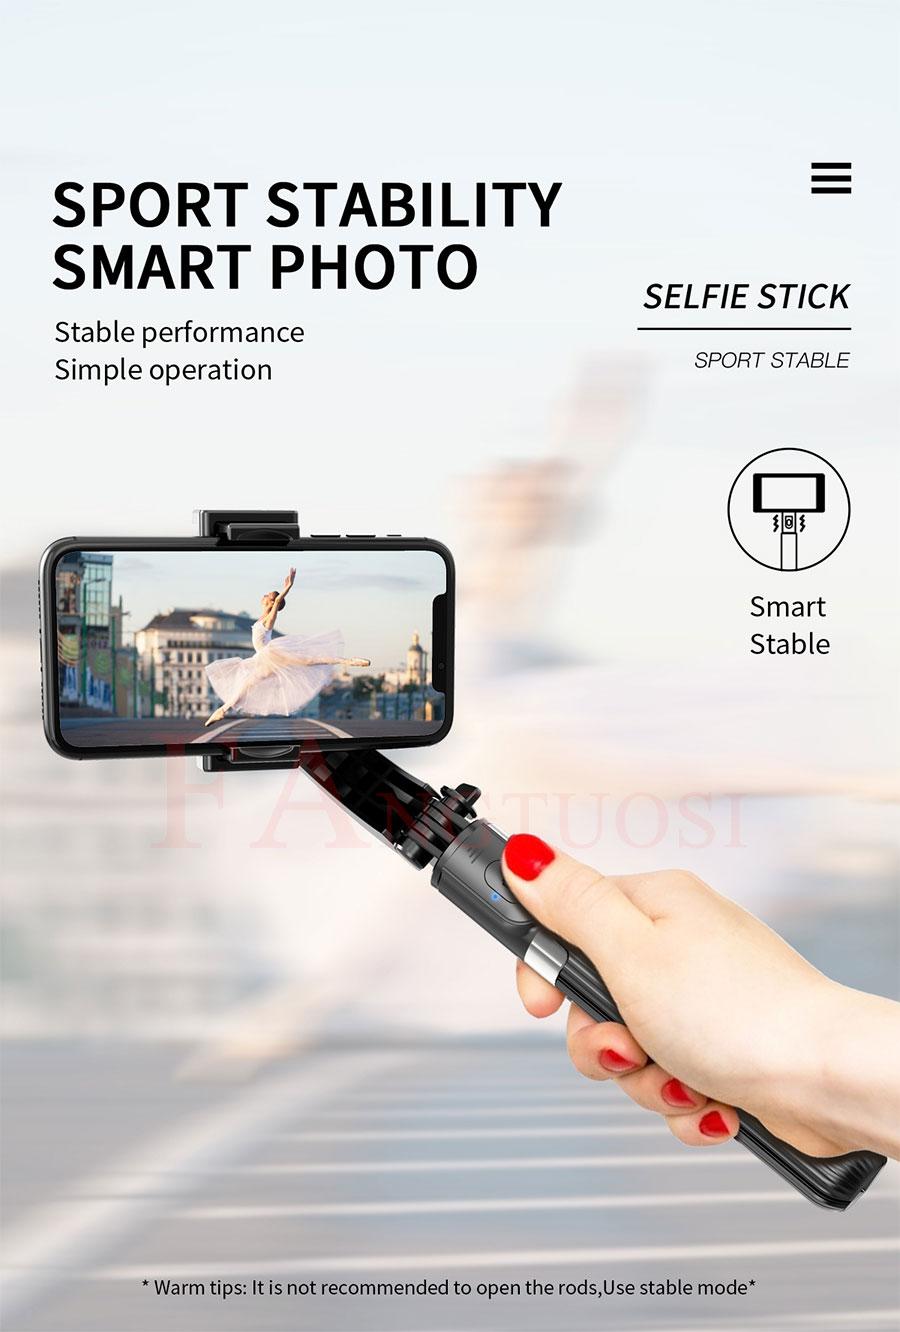 FANGTUOSI Bluetooth Handheld Gimbal Stabilizer Mobile Phone Selfie Stick Holder Adjustable Selfie Stand For iPhone/Huawei